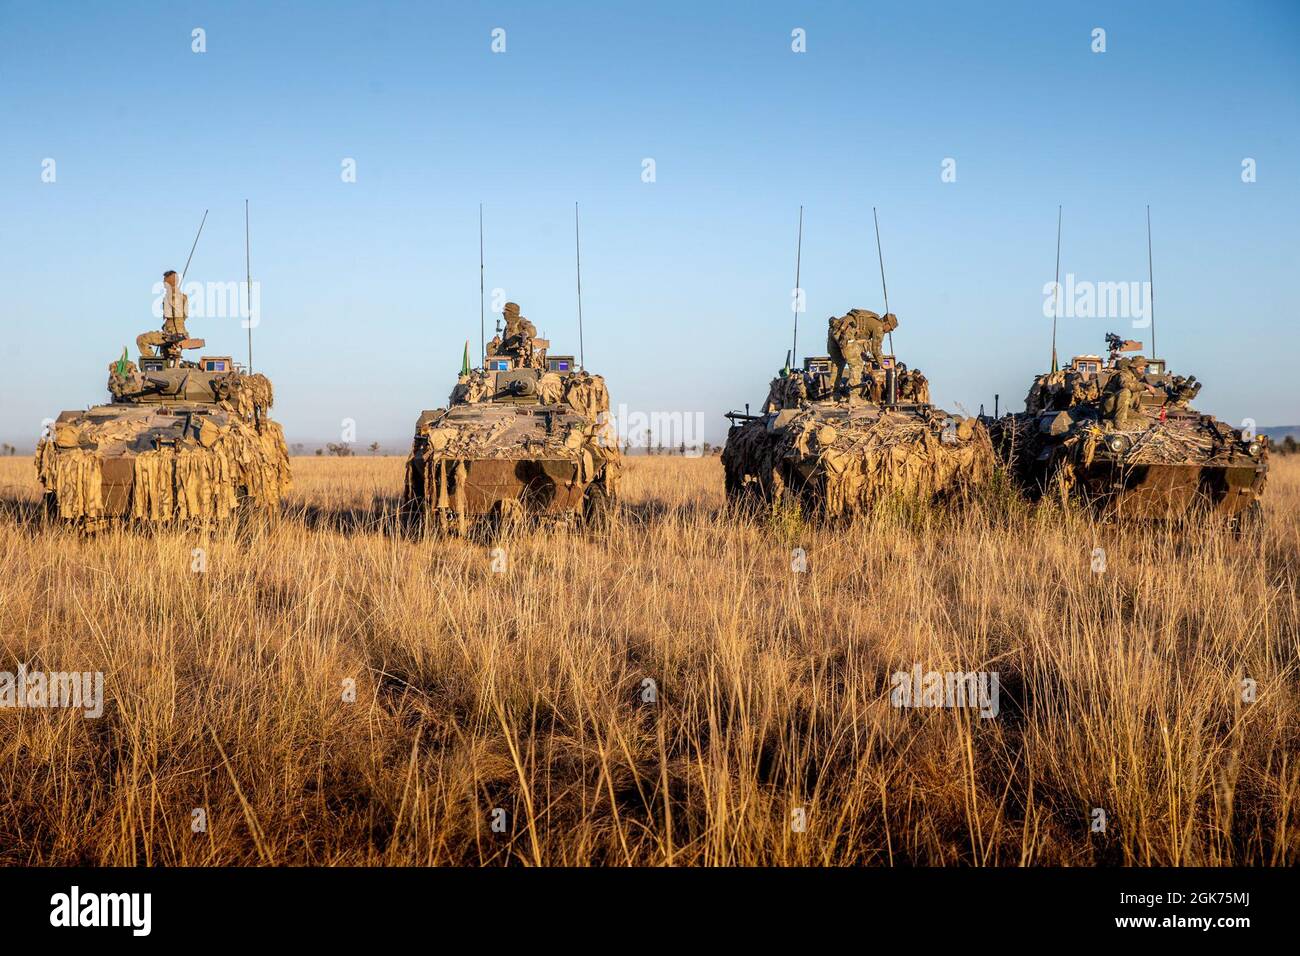 A group of Australian Service Light Armored Vehicles line up to prepare for a live-fire range at Bradshaw Field Training Area, NT, Australia, Aug. 21, 2021. 1st Armored Regiment used this range to zero their weapons in preparation for Exercise Koolendong. Exercise Koolendong validates Marine Rotational Force – Darwin’s and the Australian Defence Force’s ability to conduct expeditionary command and control operations, demonstrating the shared commitment to being ready to respond to a crisis or contingency in the Indo-Pacific region. Stock Photo